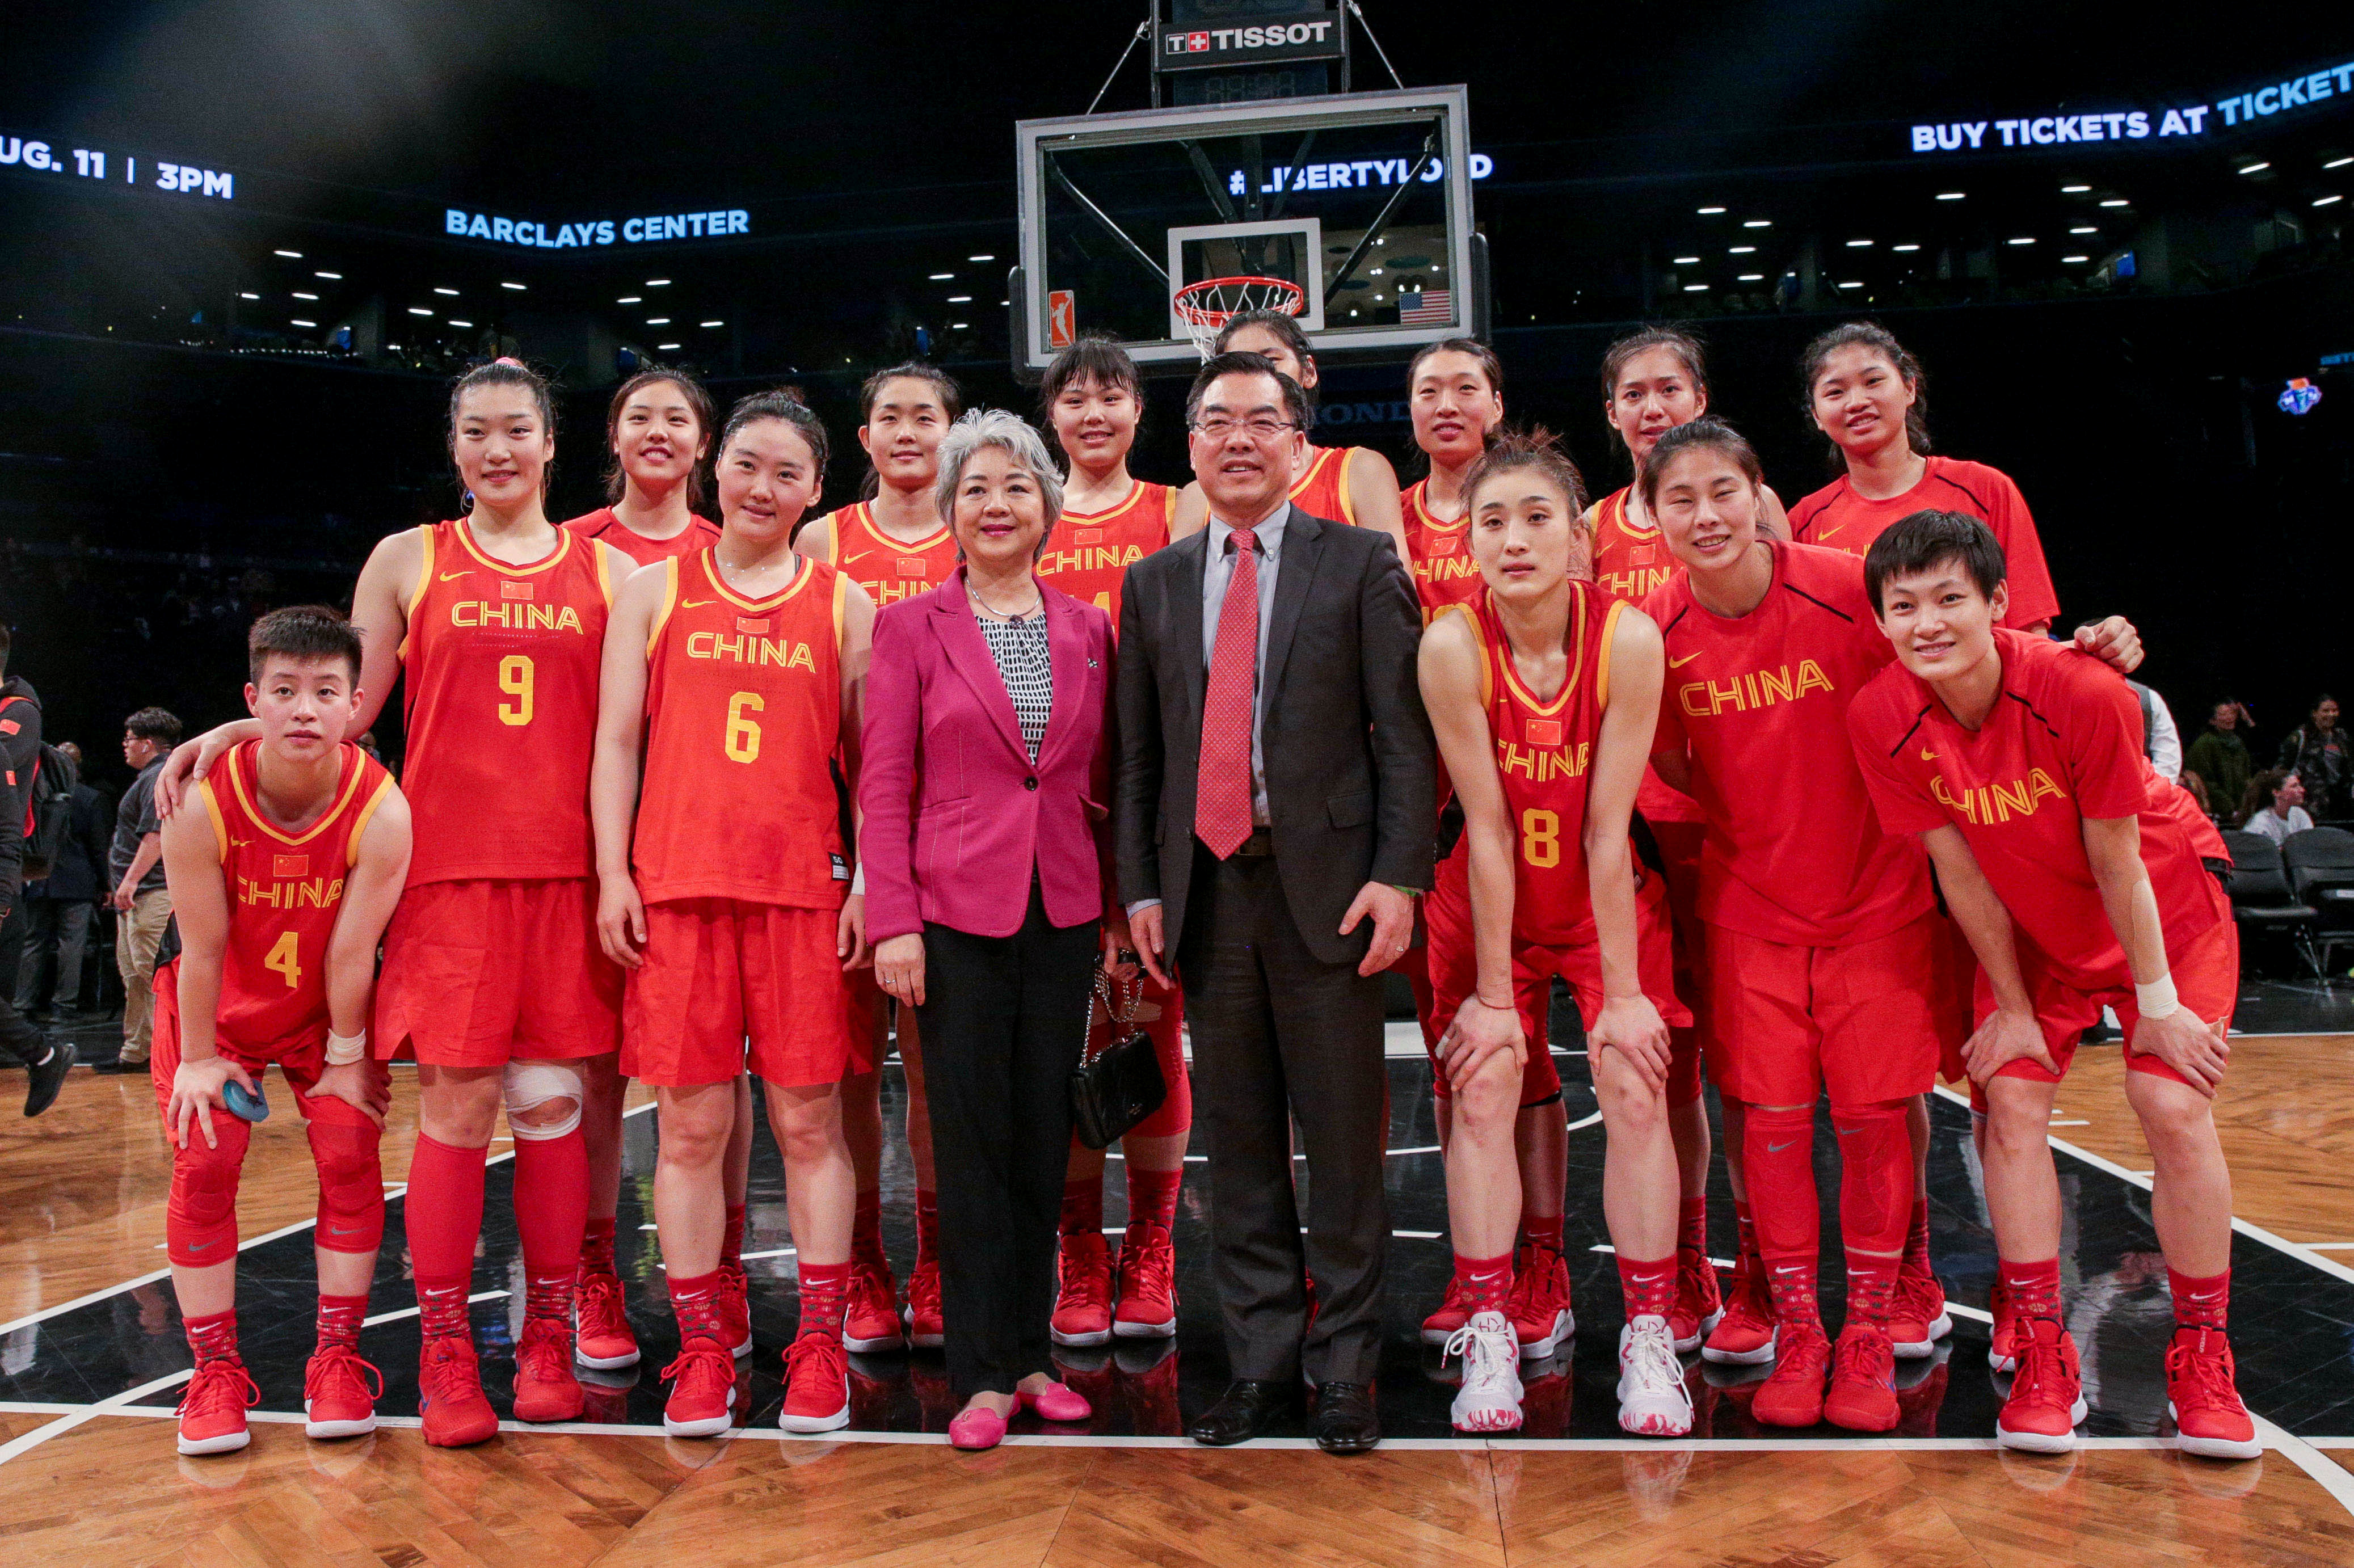 FILE PHOTO: ON THIS DAY -- May 9  May 9, 2019     BASKETBALL - The Chinese national team poses with Consul General Huang Ping after their 89-71 loss to the New York Liberty in a pre-season WNBA game at Barclays Center.     The game was organised in an effort to support women athletes globally and was part of a series of collaborations between the Chinese Basketball Association and overseas leagues.     Han Xu, who had impressed for China in the previous year's FIBA World Cup, was selected by Liberty in the second round of the WNBA draft and scored 19 points to lead New York to victory. Vincent Carchietta-USA TODAY Sports/File photo